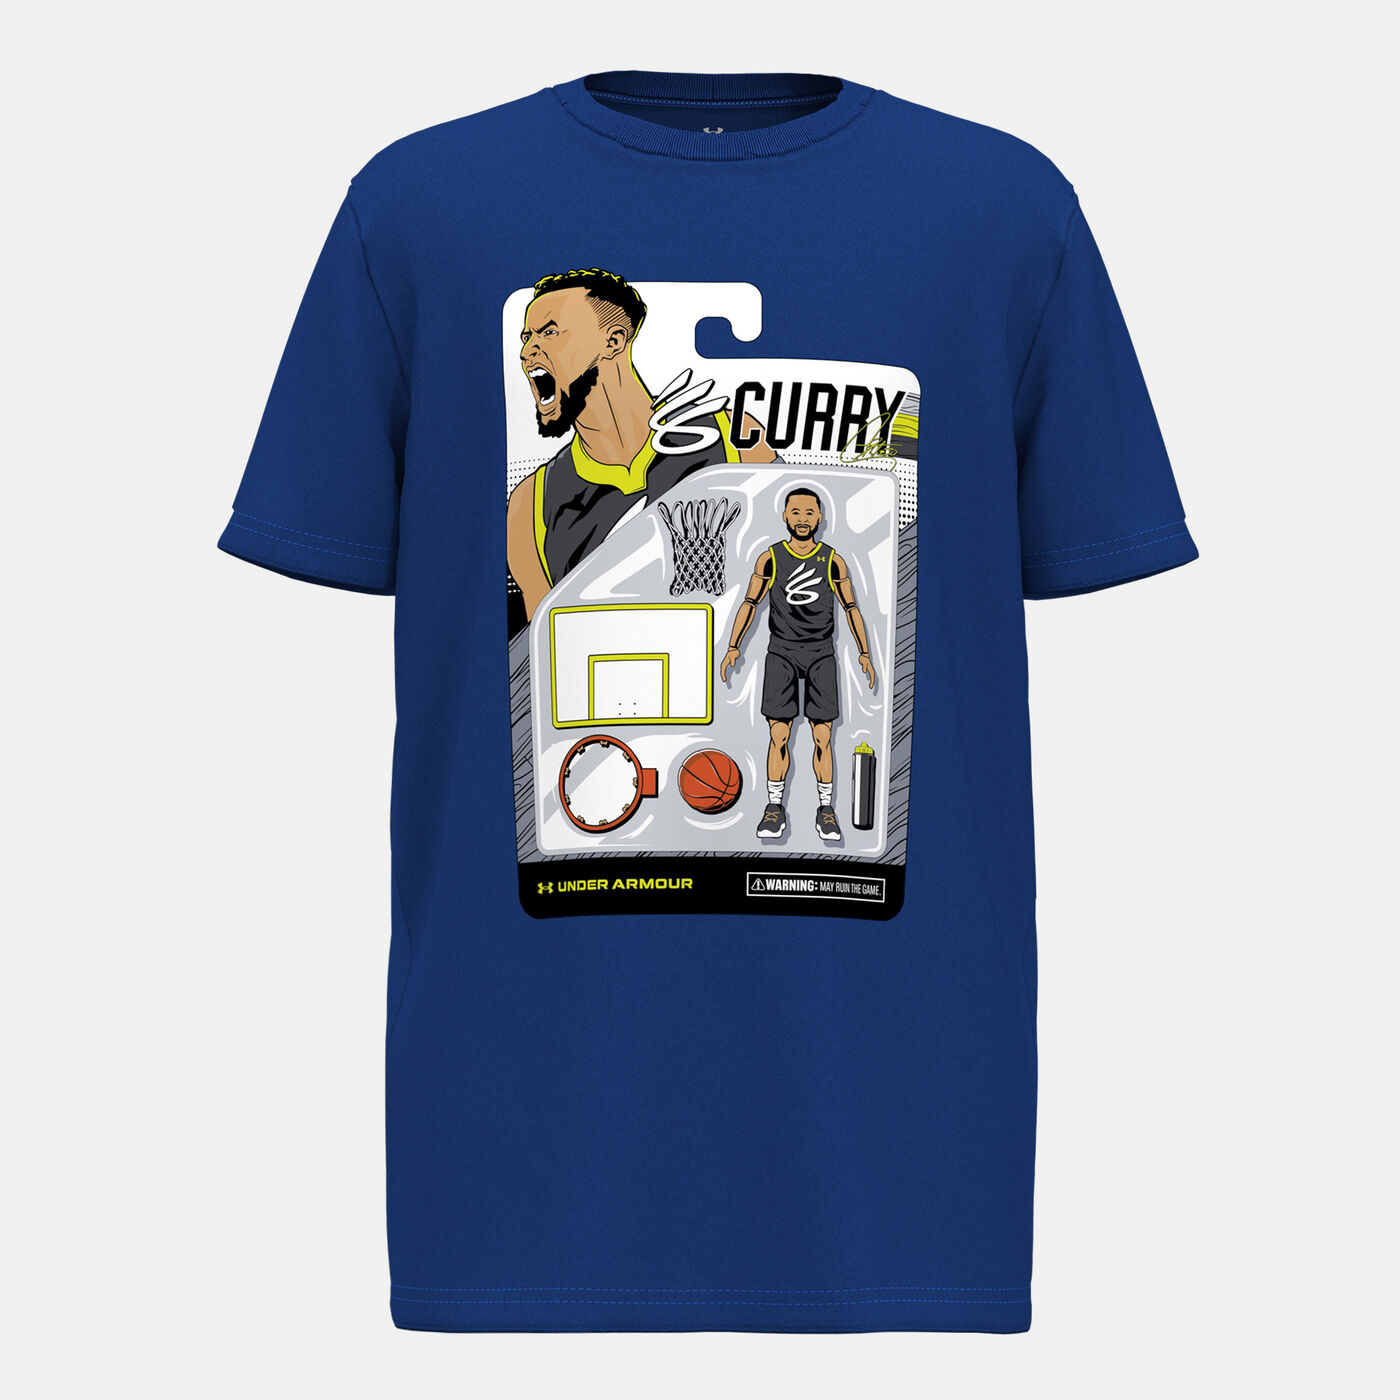 Kids' Curry Animated T-Shirt